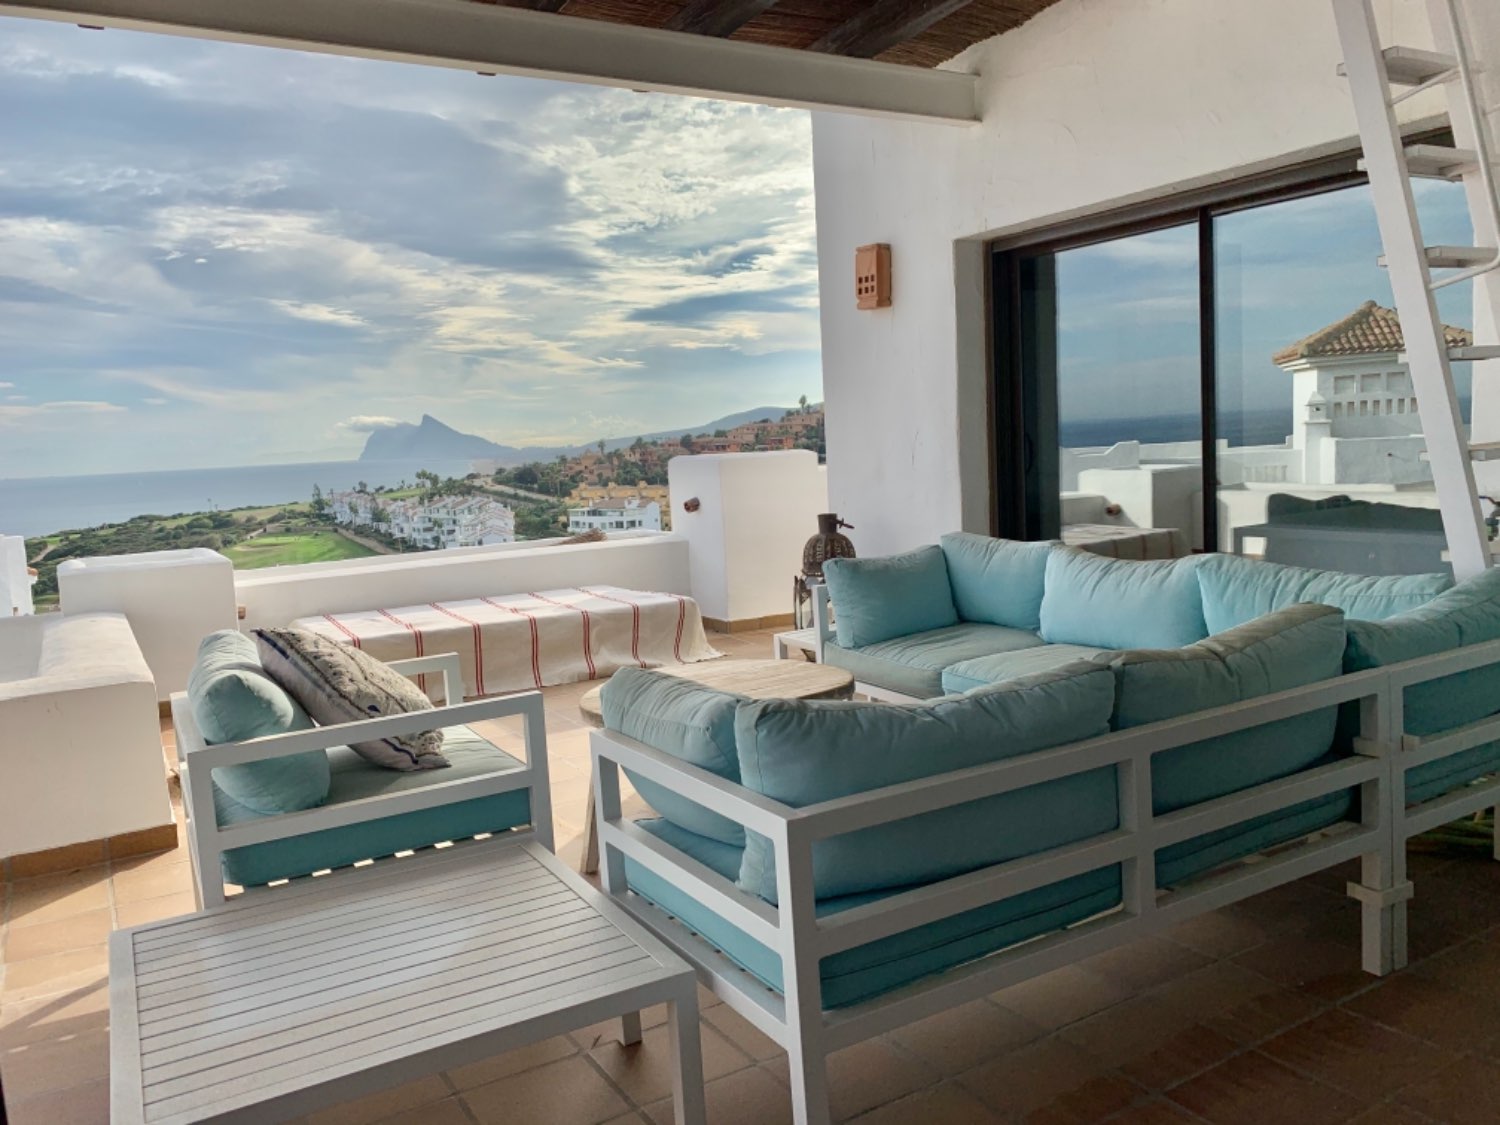 Dreamy views from this fabulous penthouse in Alcaidesa